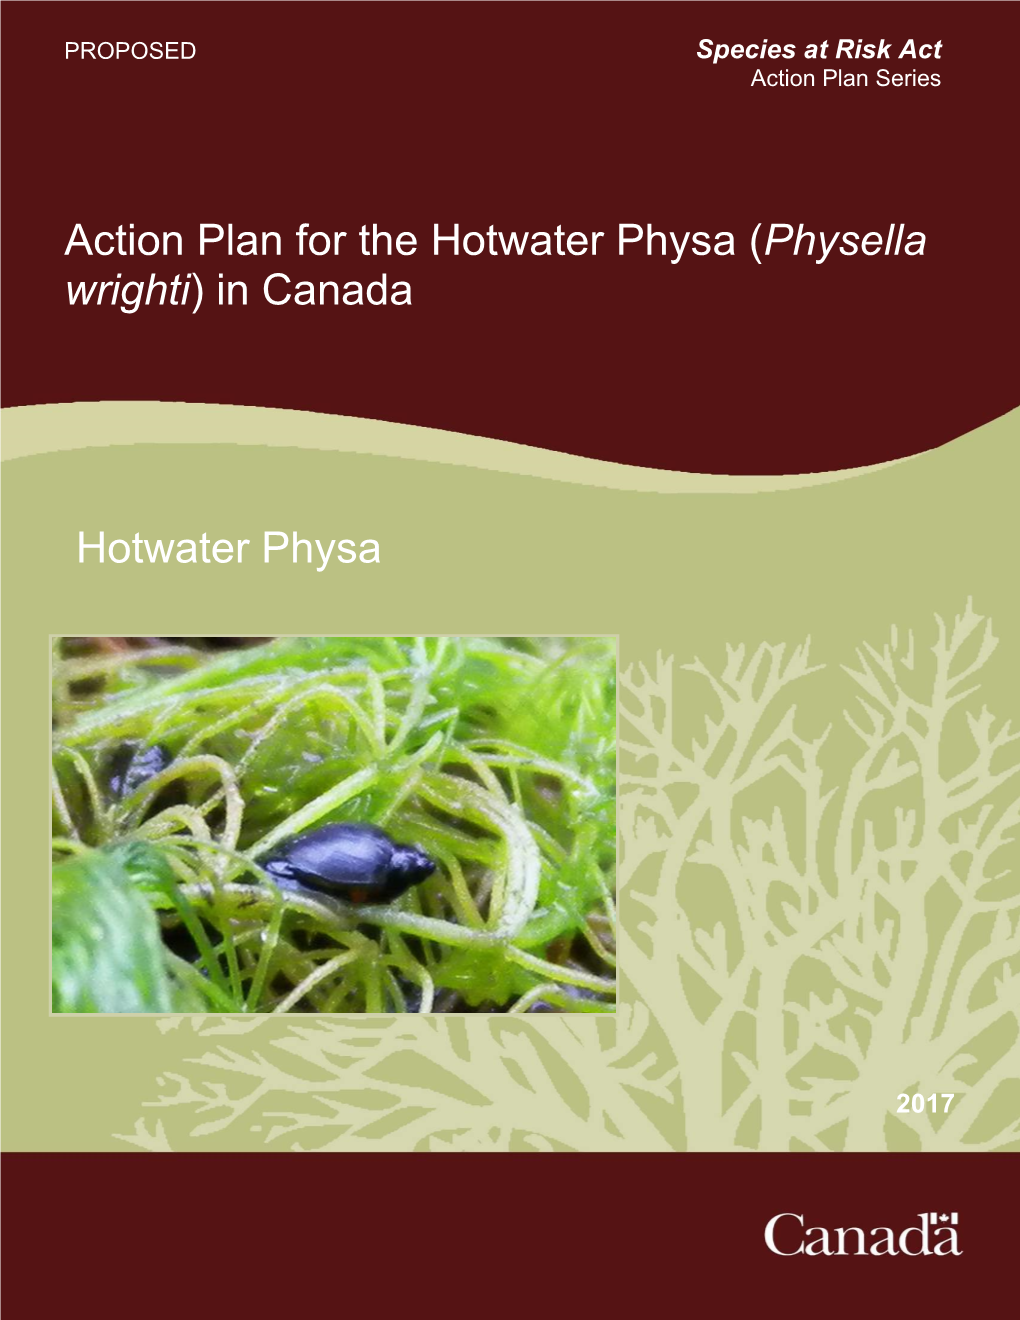 Action Plan for the Hotwater Physa (Physella Wrighti) in Canada [Proposed]